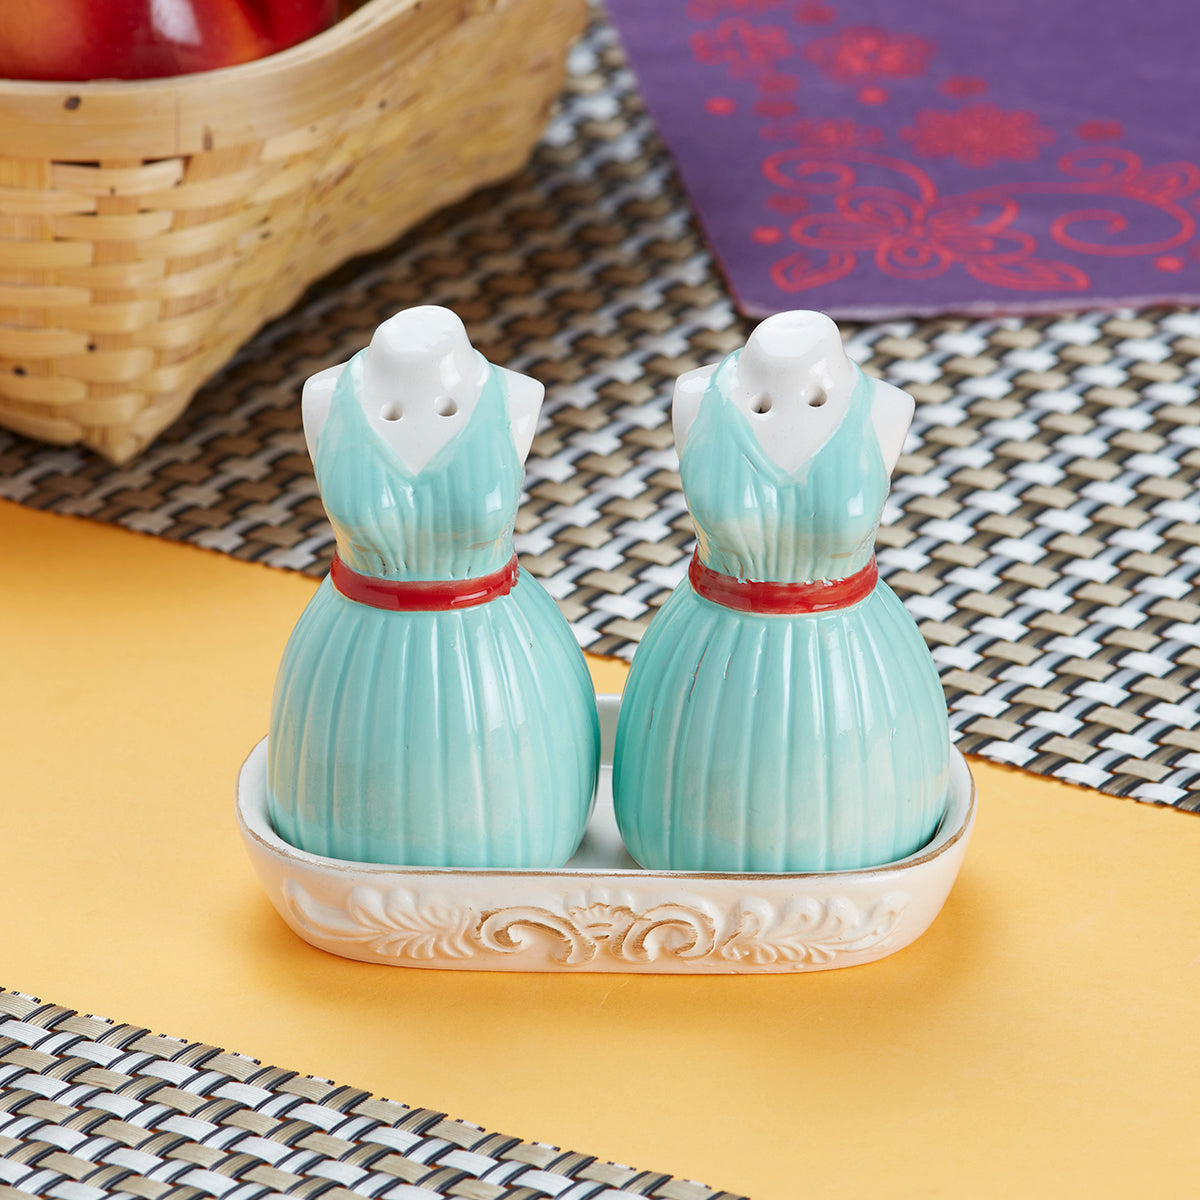 Kookee Ceramic Salt and Pepper Shakers Set with tray for Dining Table used as Namak Dhani, Shaker, Sprinkler, Spices Dispenser for Home, Kitchen and Restaurant (9972)